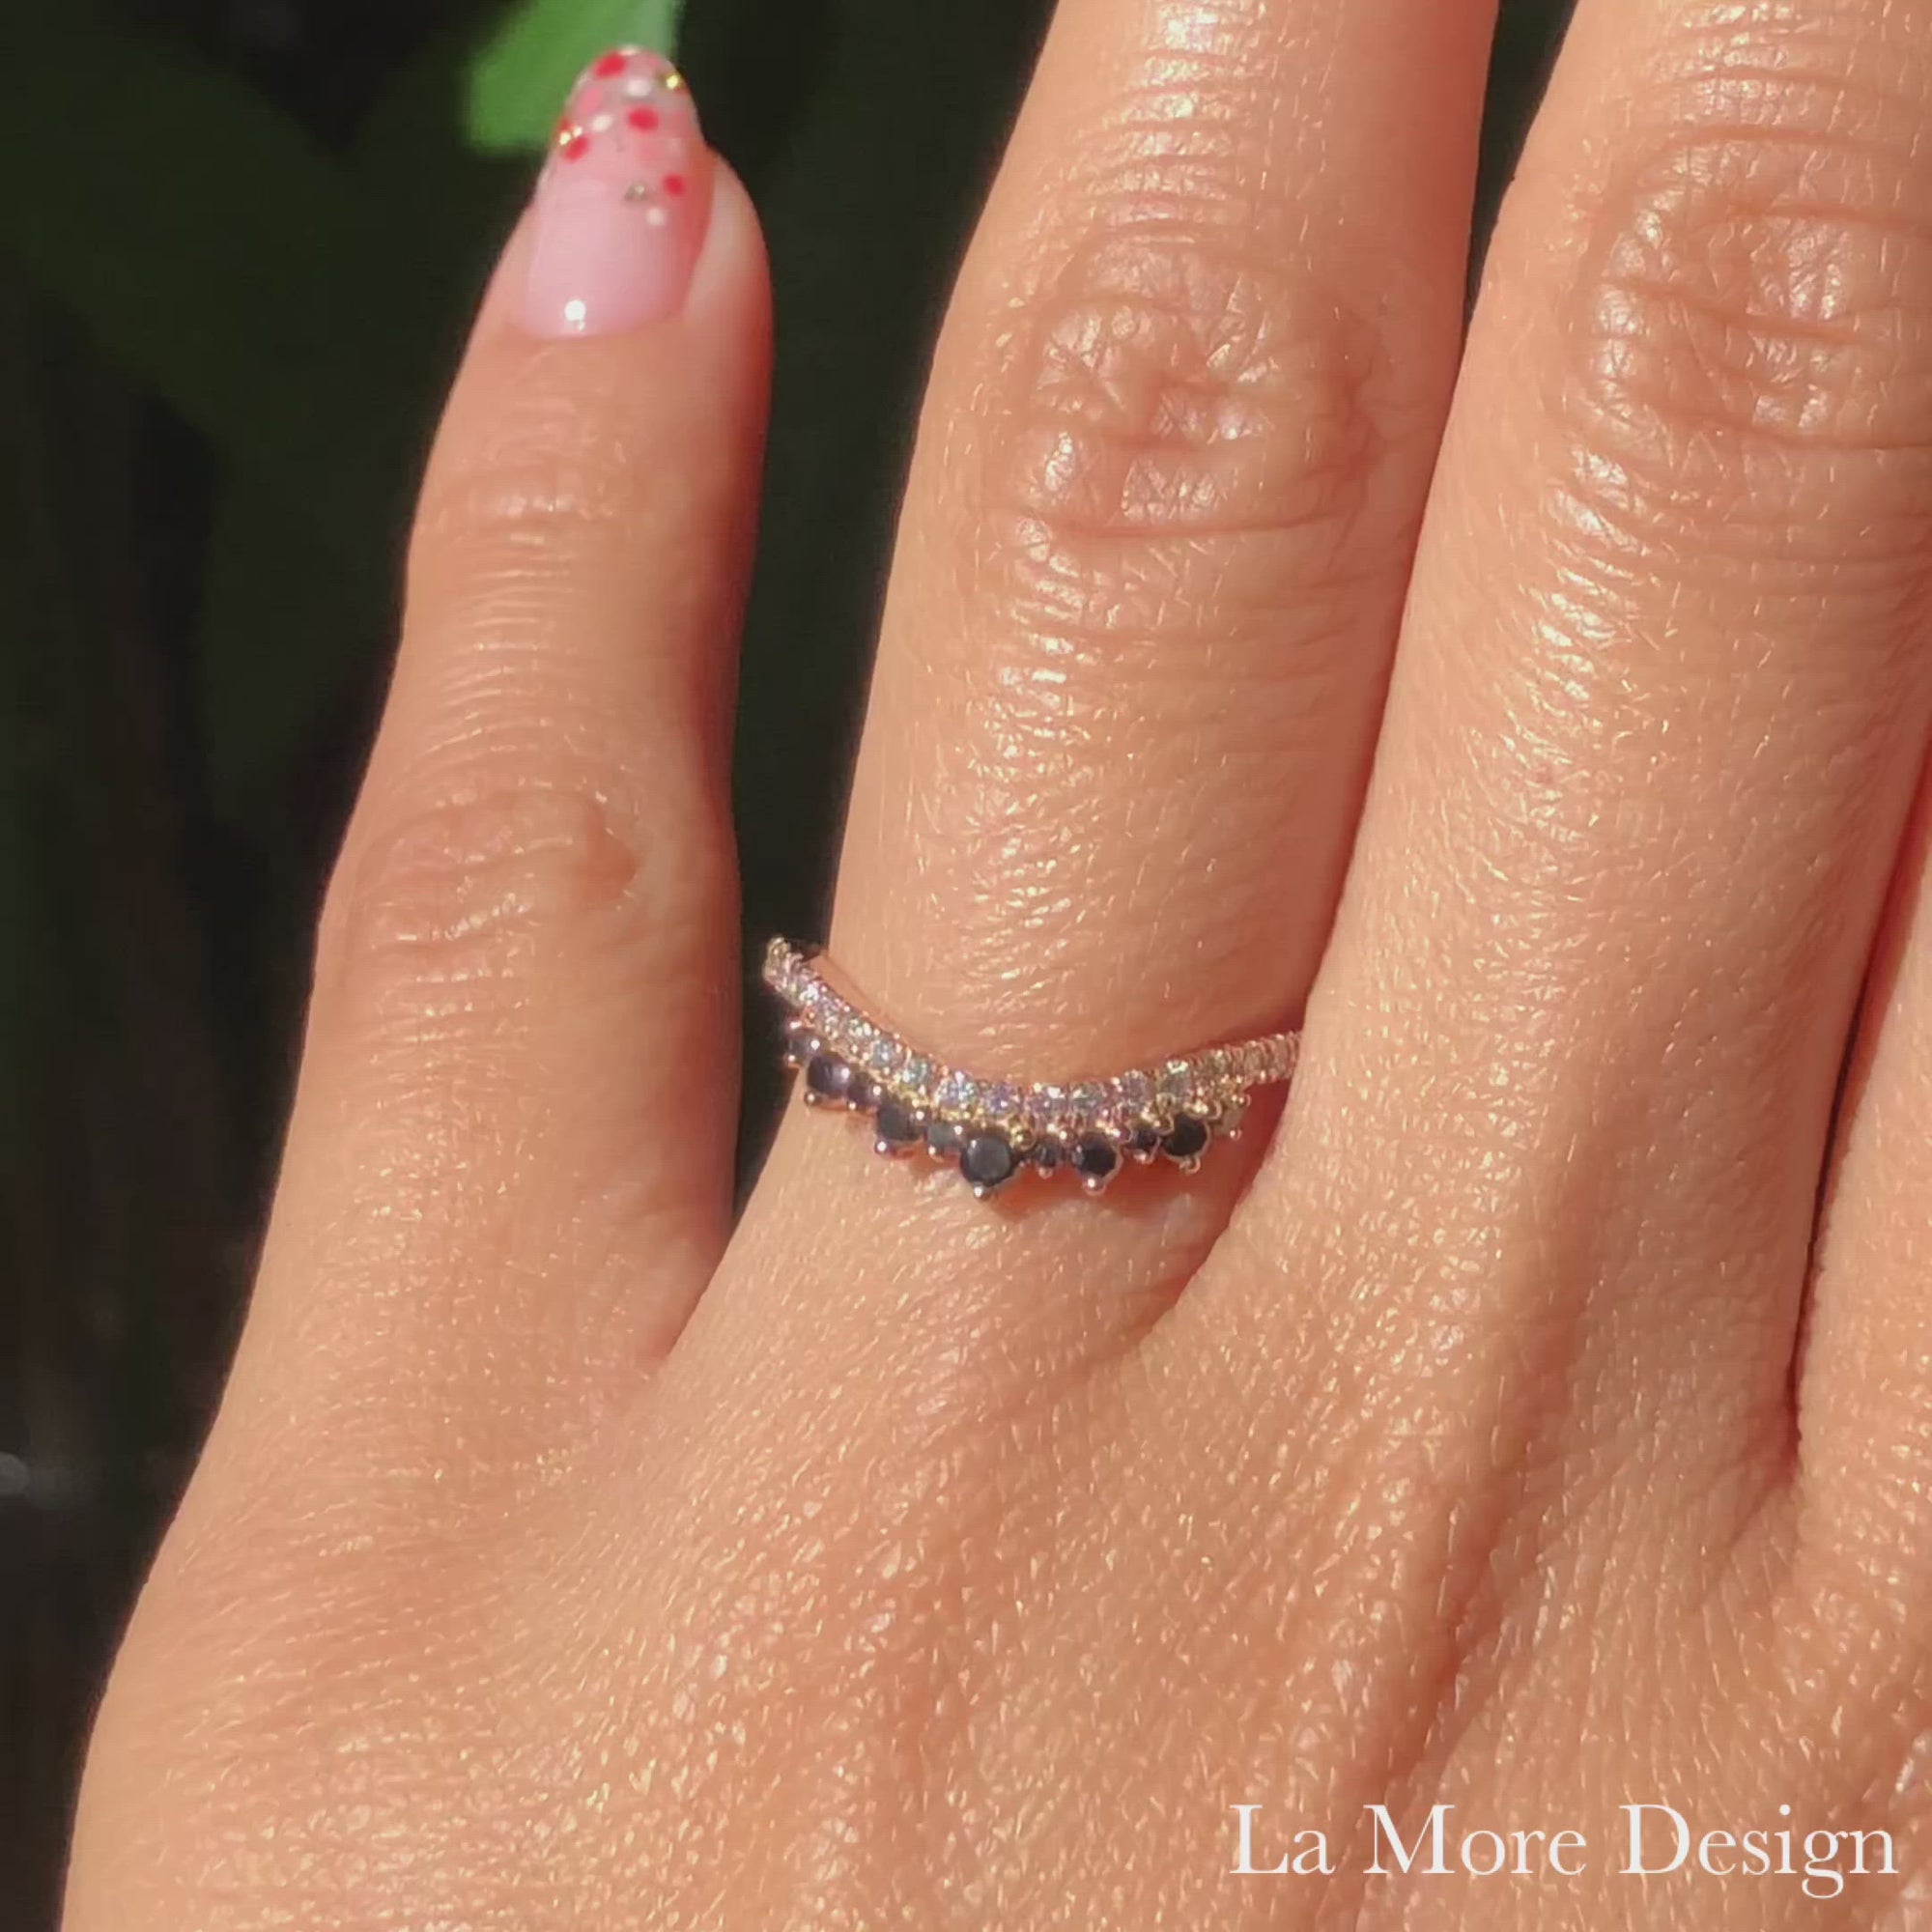 This unique crown wedding band features white diamonds set in a rose gold pave band and to add a stunning effect to this curved ring, brilliant black diamonds are set gracefully into the crown. This curved diamond band can be made in your choice of platinum, 18k or 14k white, rose, or yellow gold.